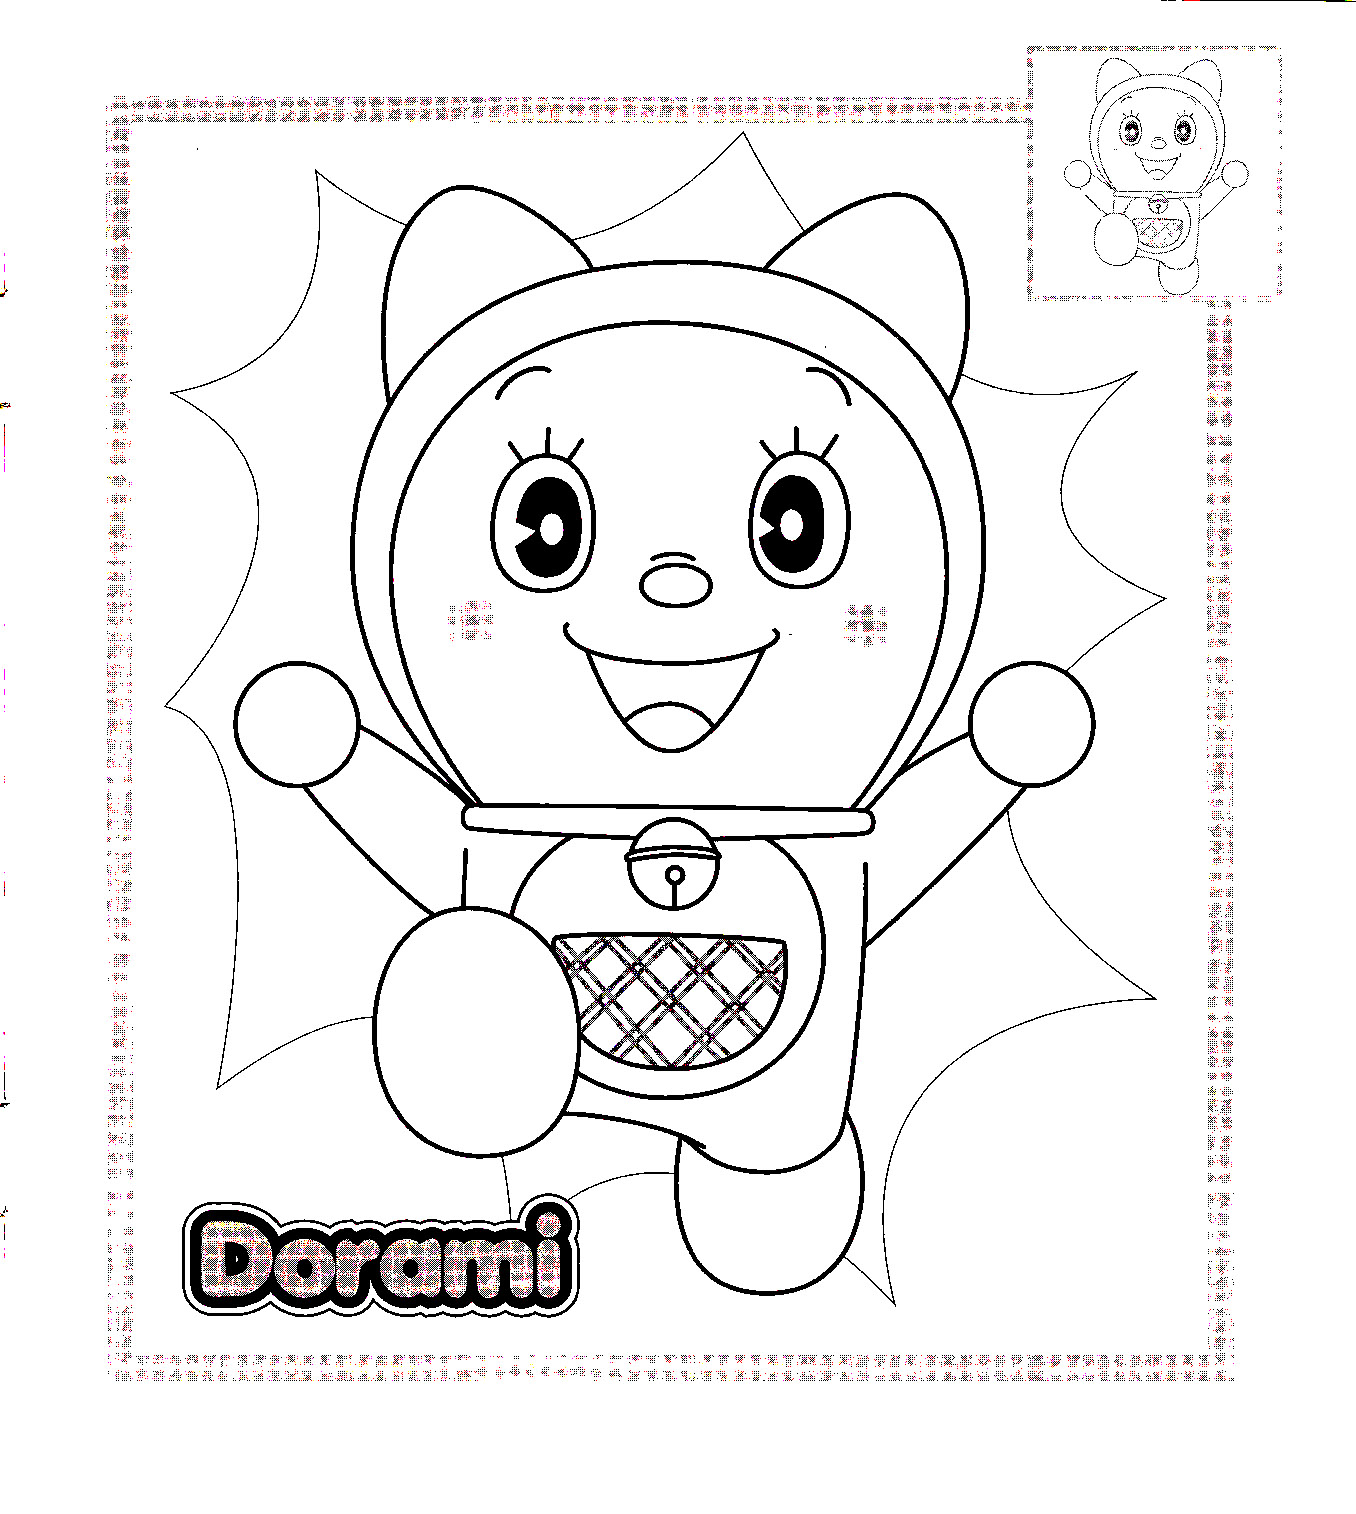 Doraemon Coloring in Pages 2